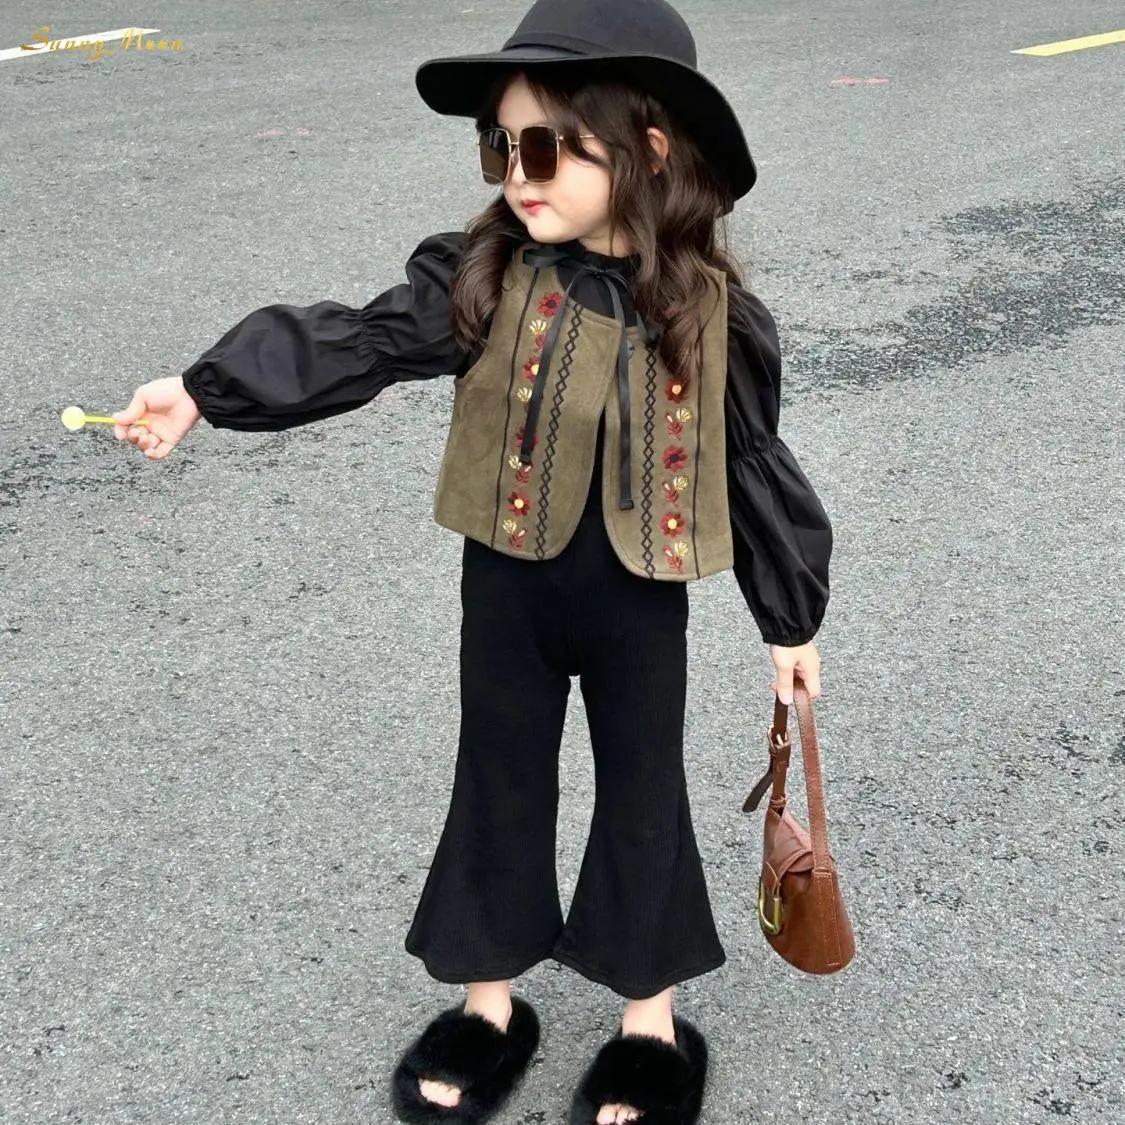 

Fashion Girl Heavy Spring Autumn Embroidery Vest Cardigan Puff Sleeve Shirt Flare Pant Clothesset 3PCS Infant Toddler Child 1-7Y